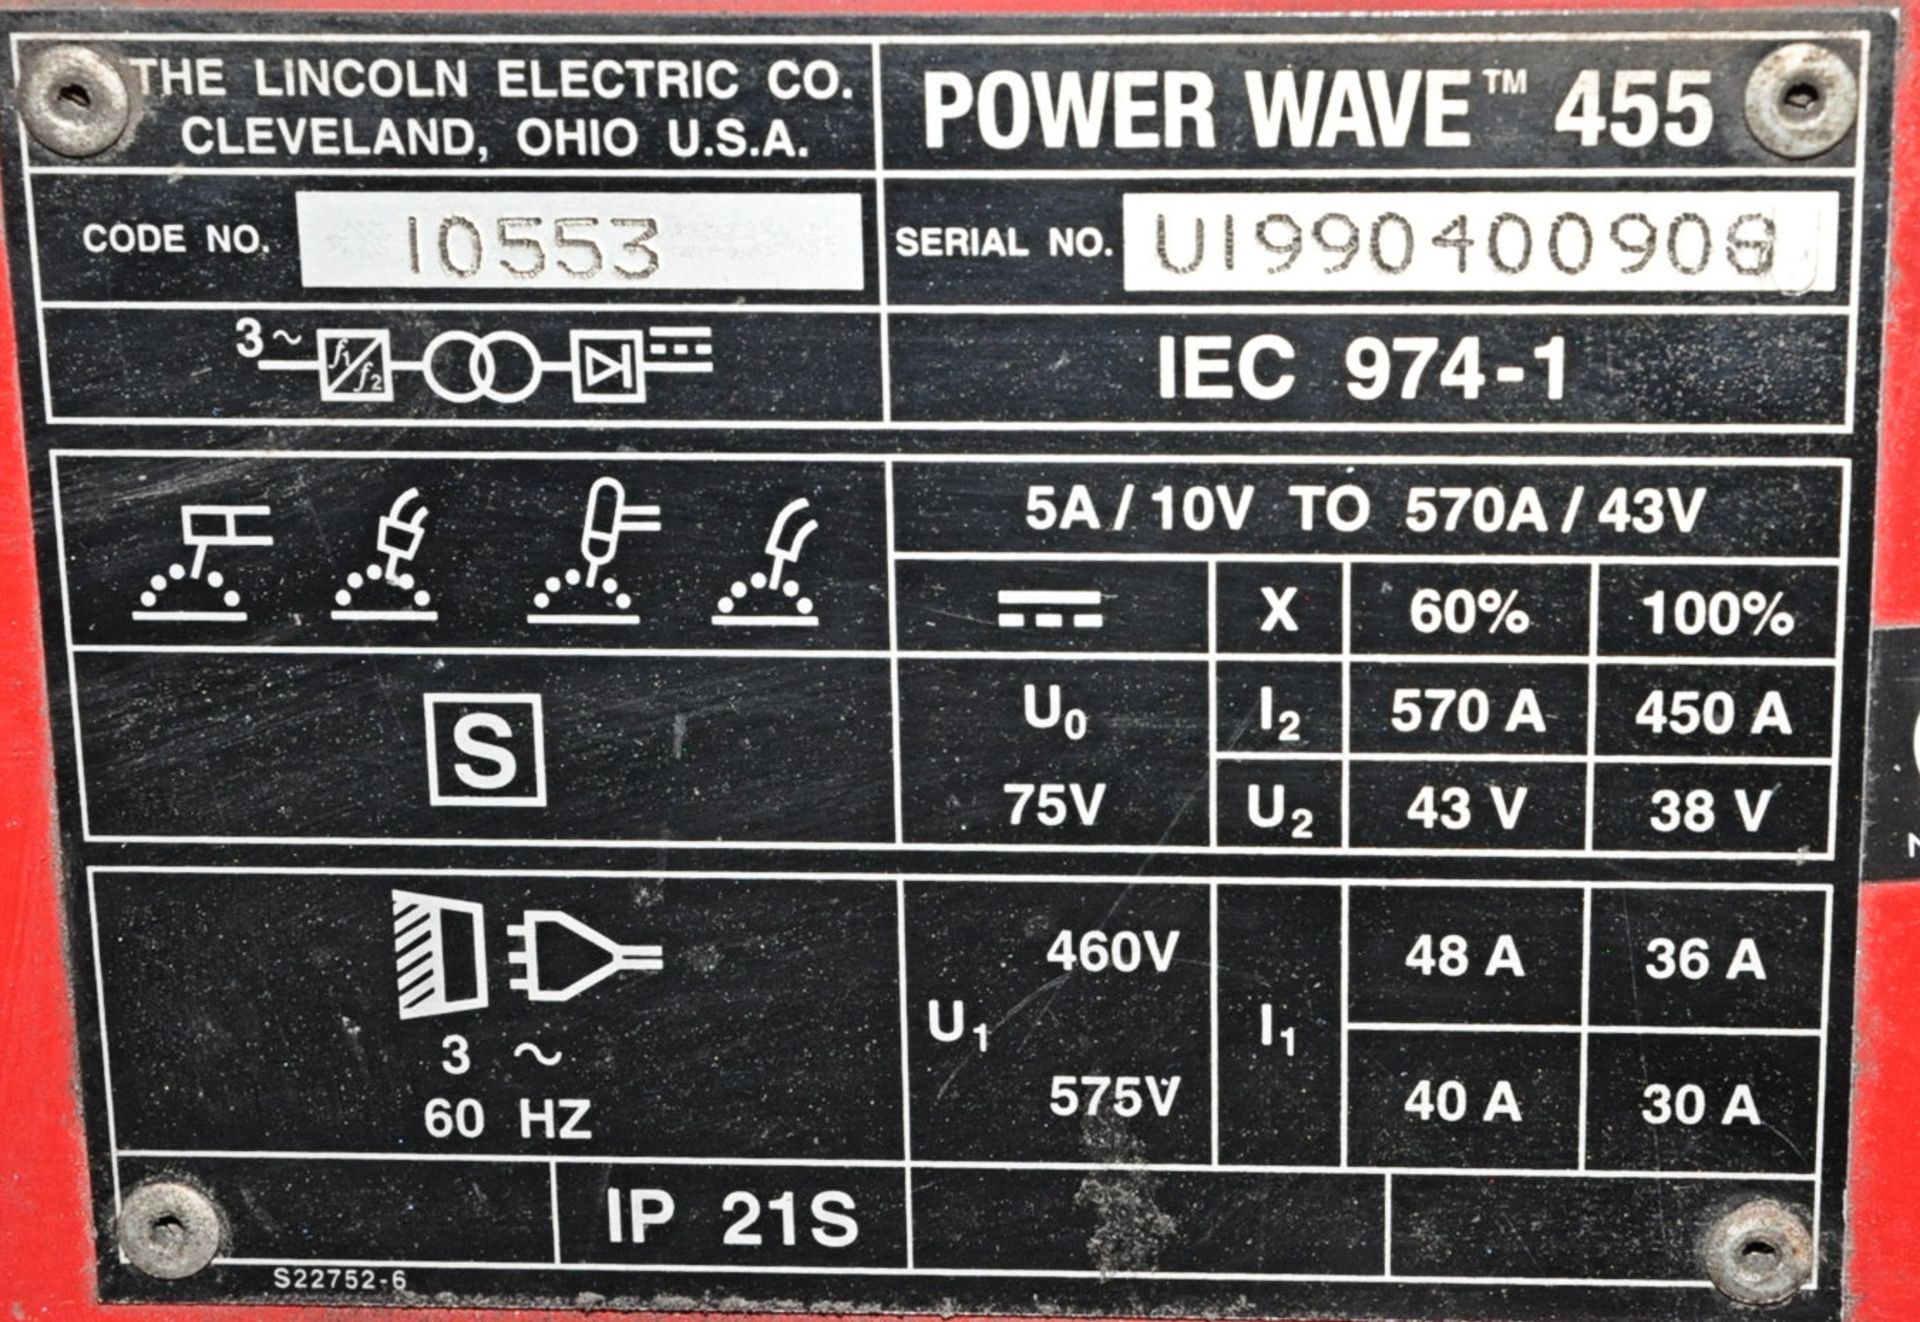 Lincoln Electric Power Wave 455, 450-Amp Capacity Arc Welding Power Source - Image 3 of 3